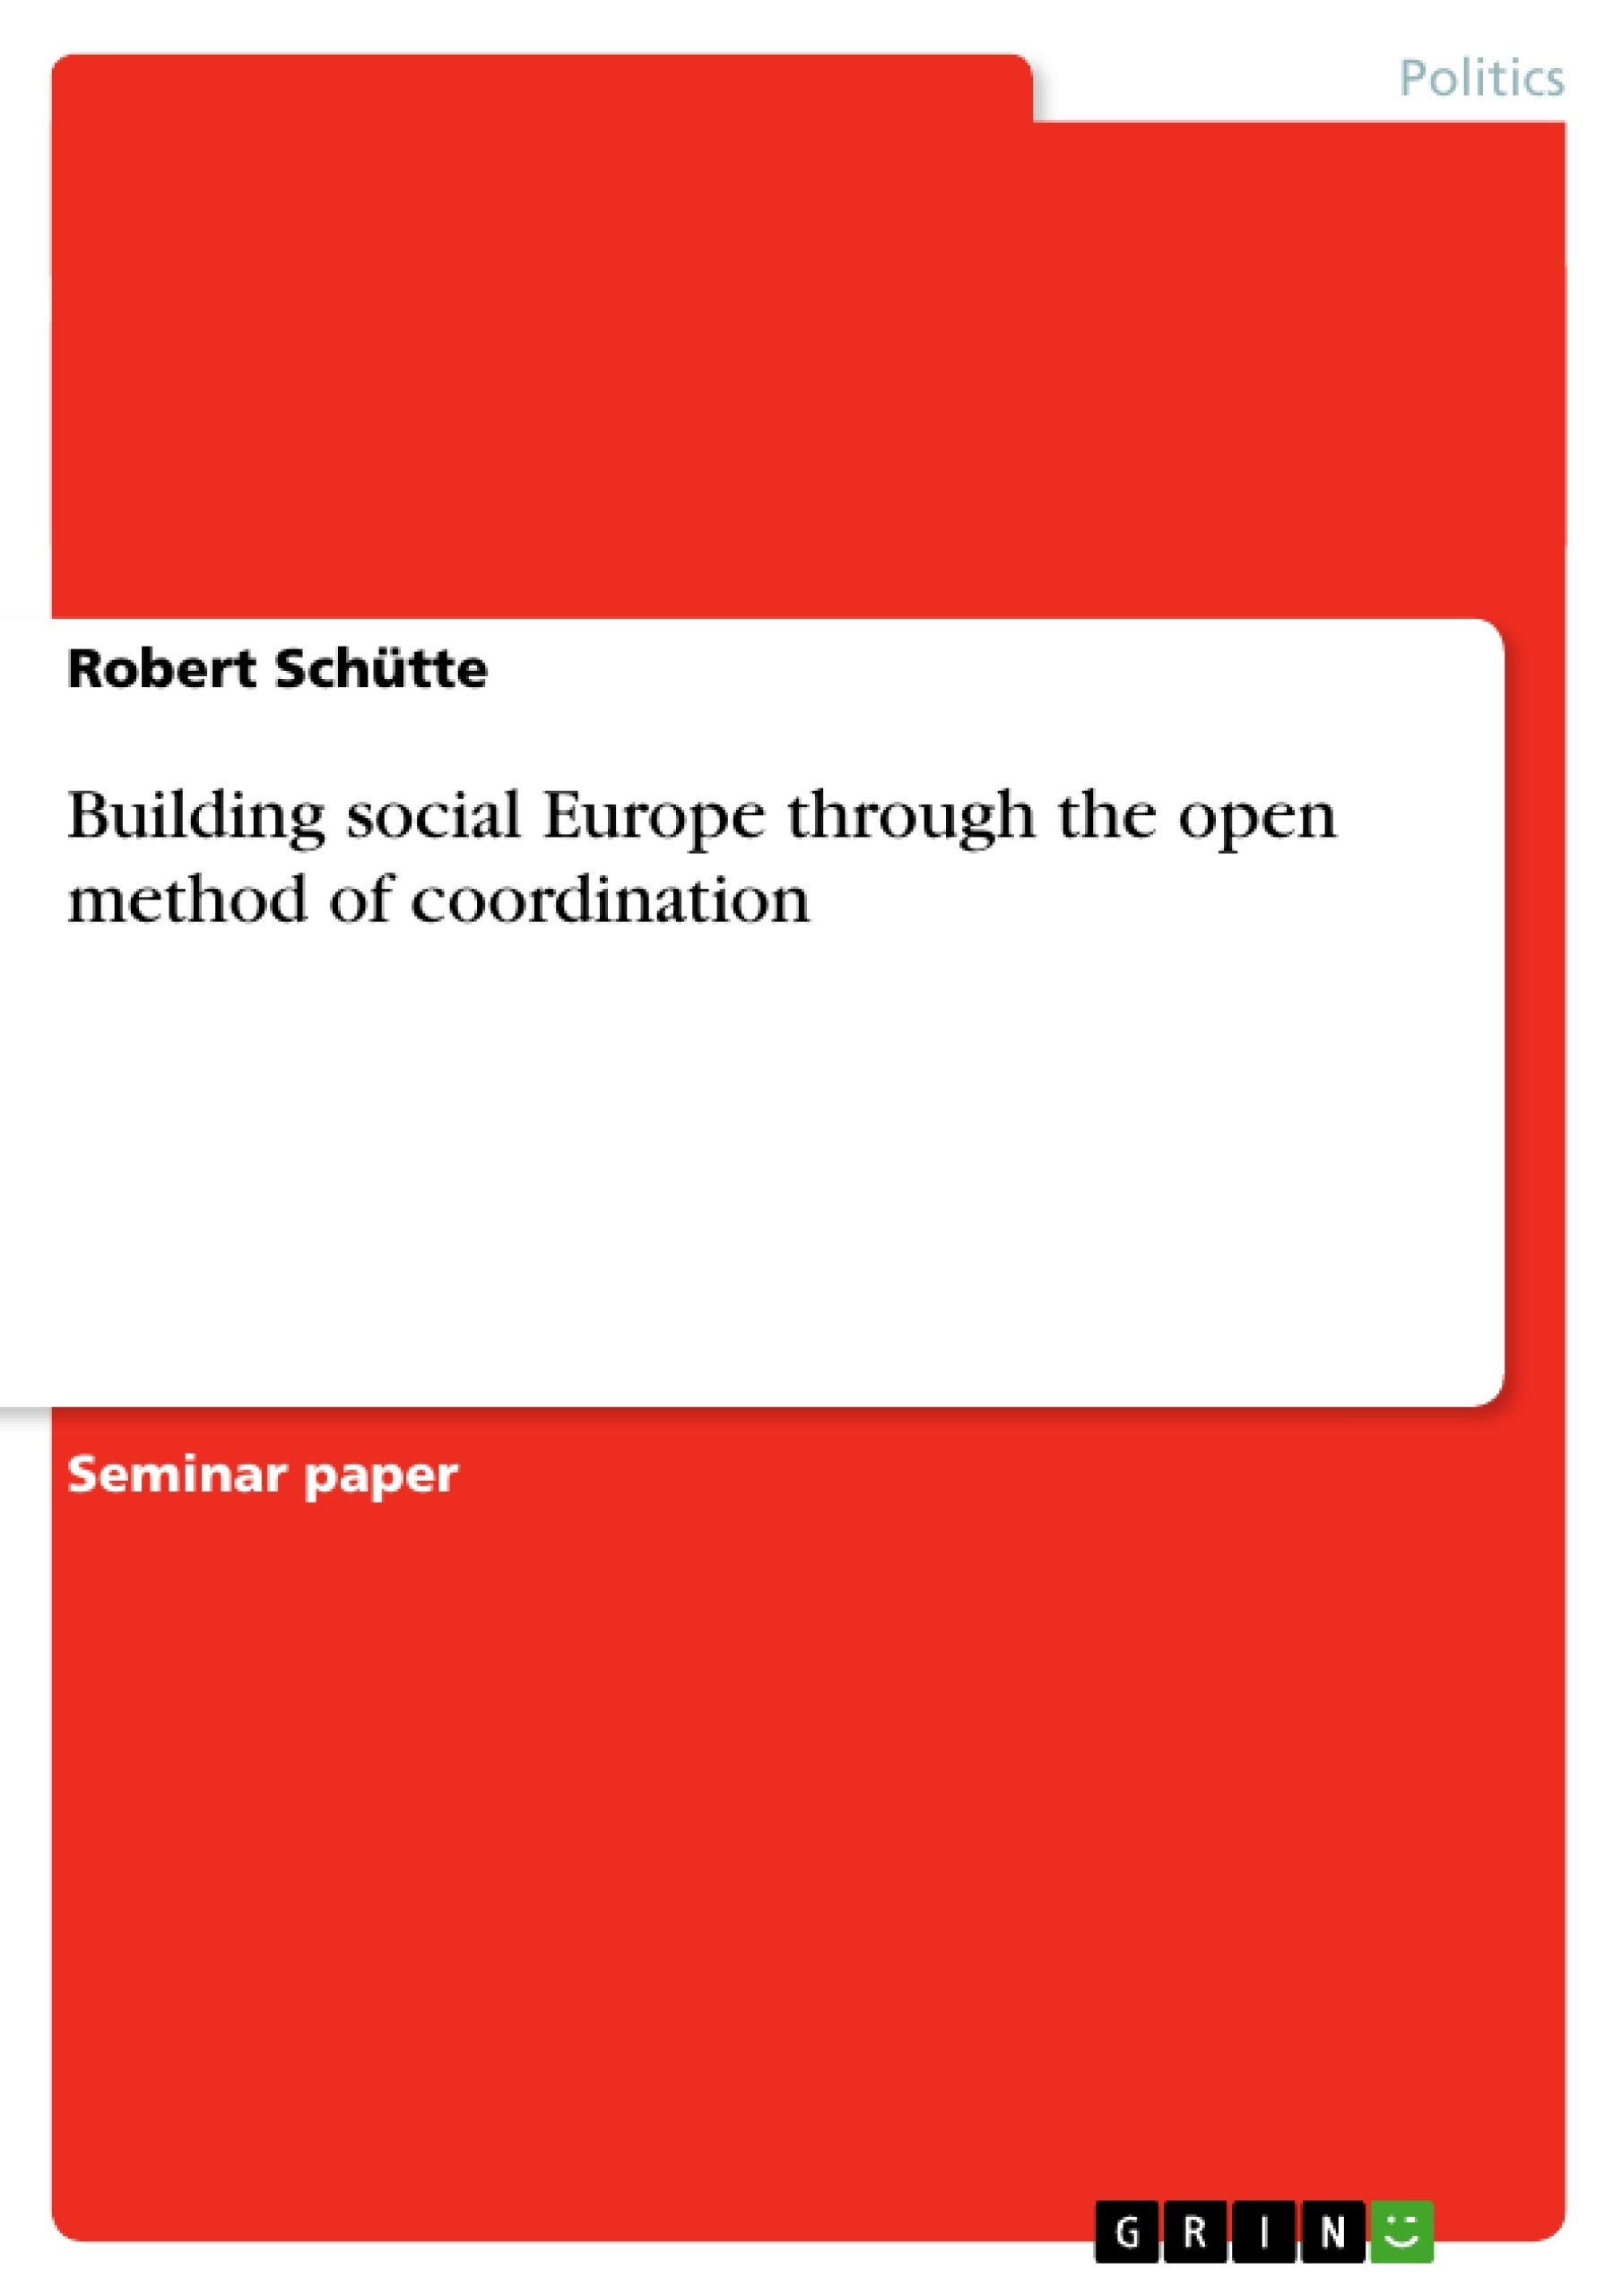 Title: Building social Europe through the open method of coordination